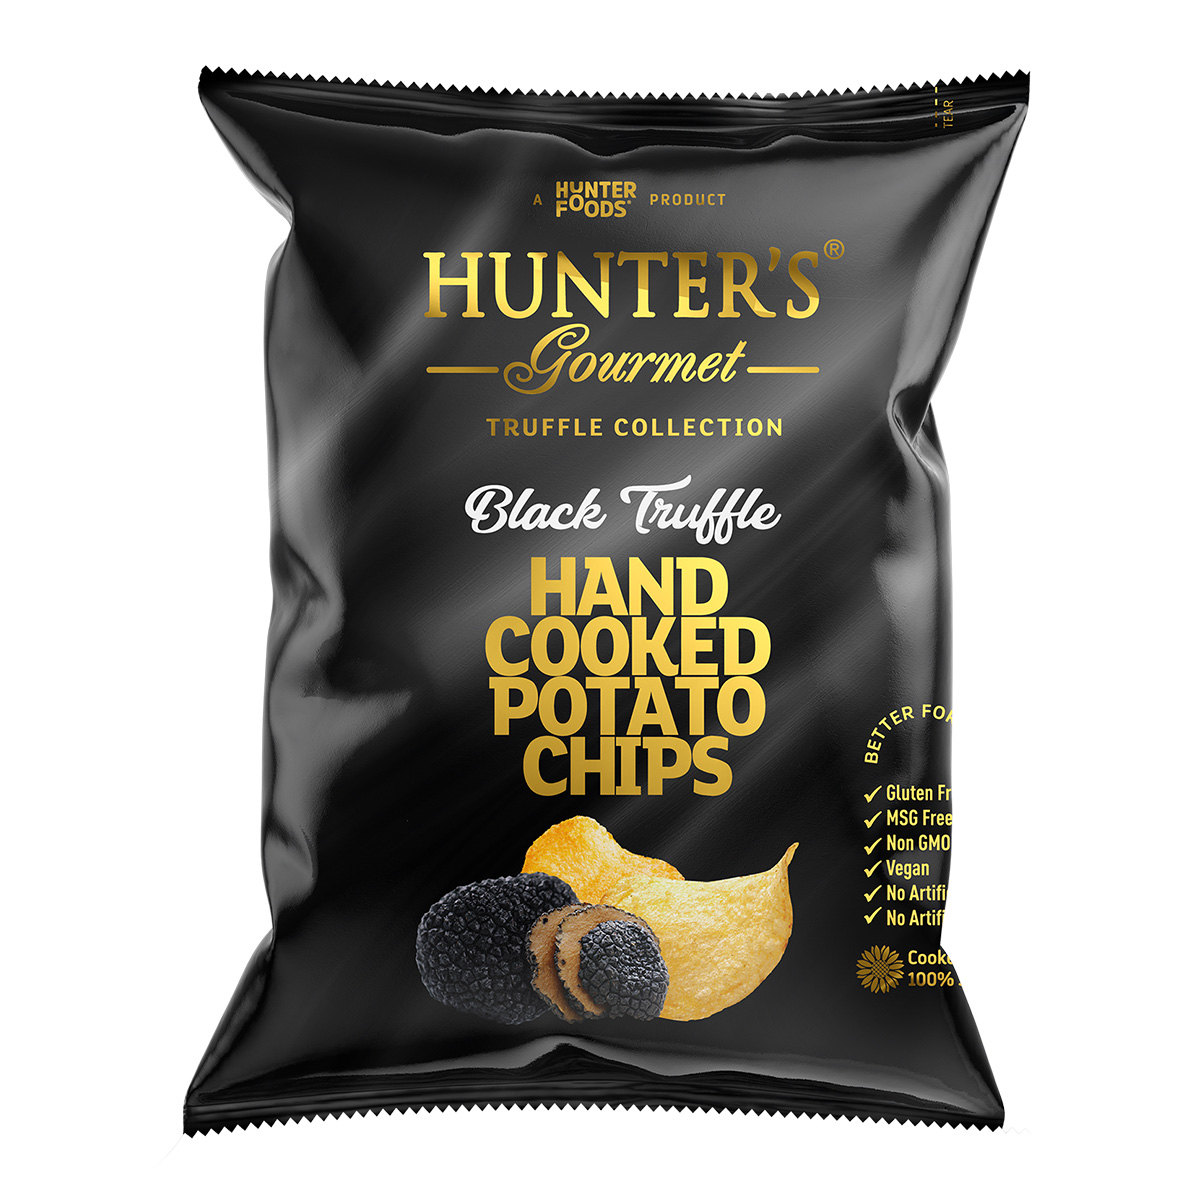 Hunter’s Gourmet Hand Cooked Potato Chips - Black Truffle - Truffle Collection (125gm)